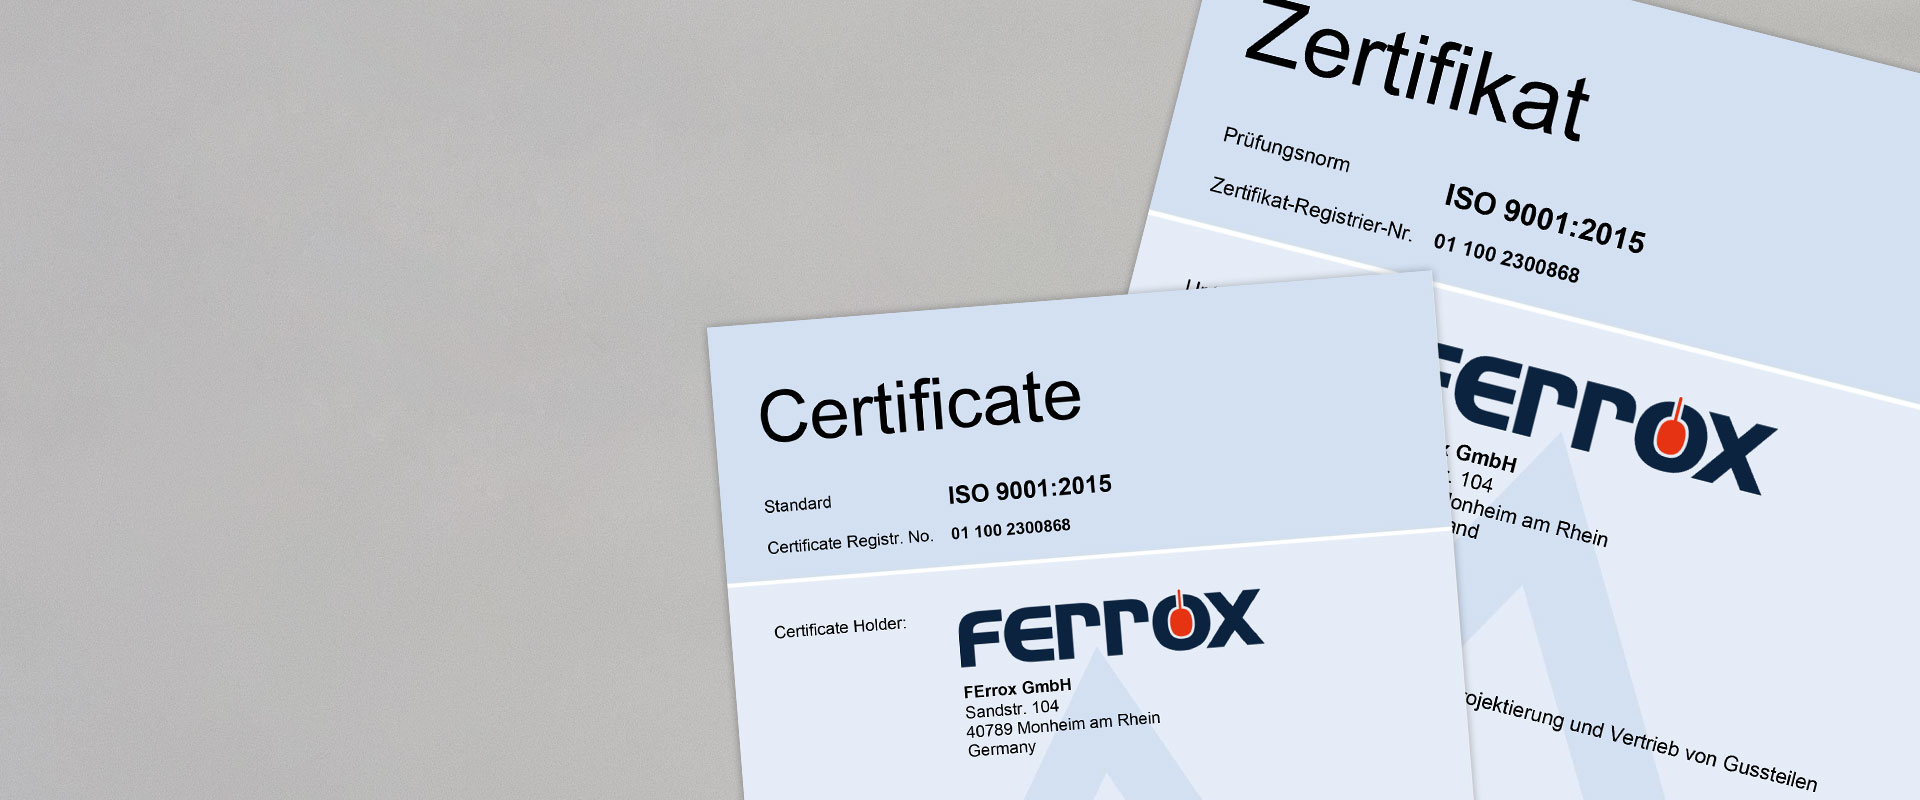 FErrox GmbH - Innovative production using the traditional lost-wax technique.